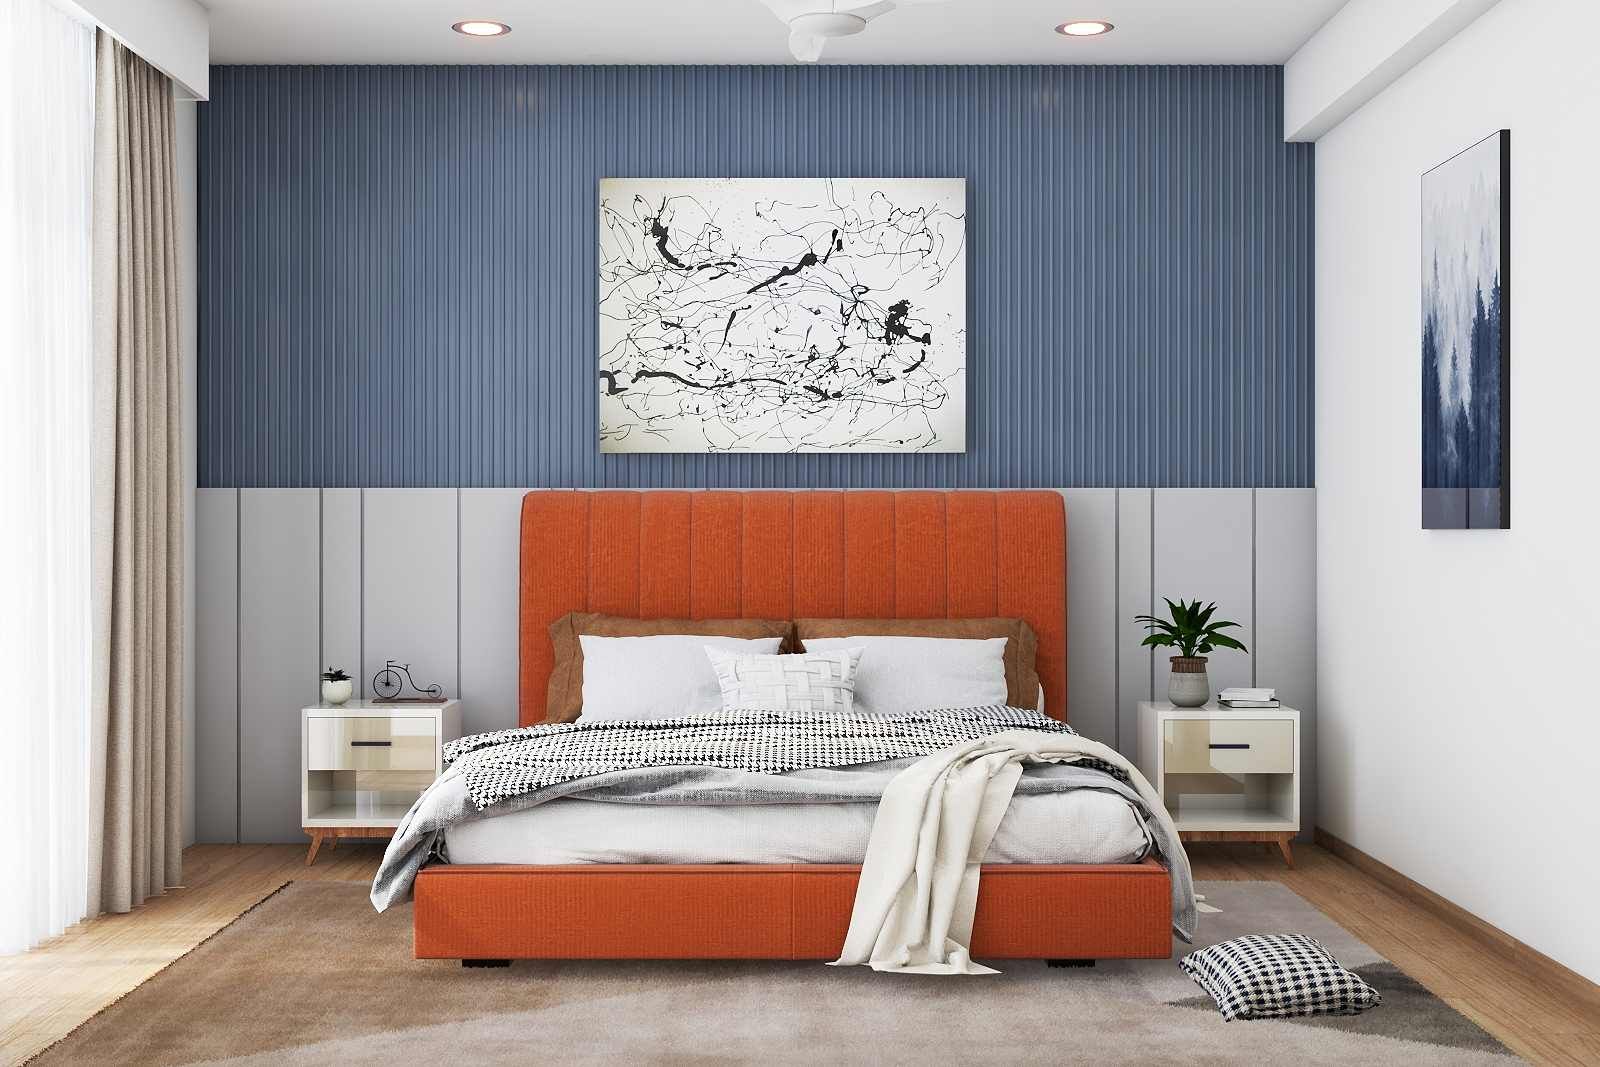 Contemporary Master Bedroom Design With Orange Upholstered Bed